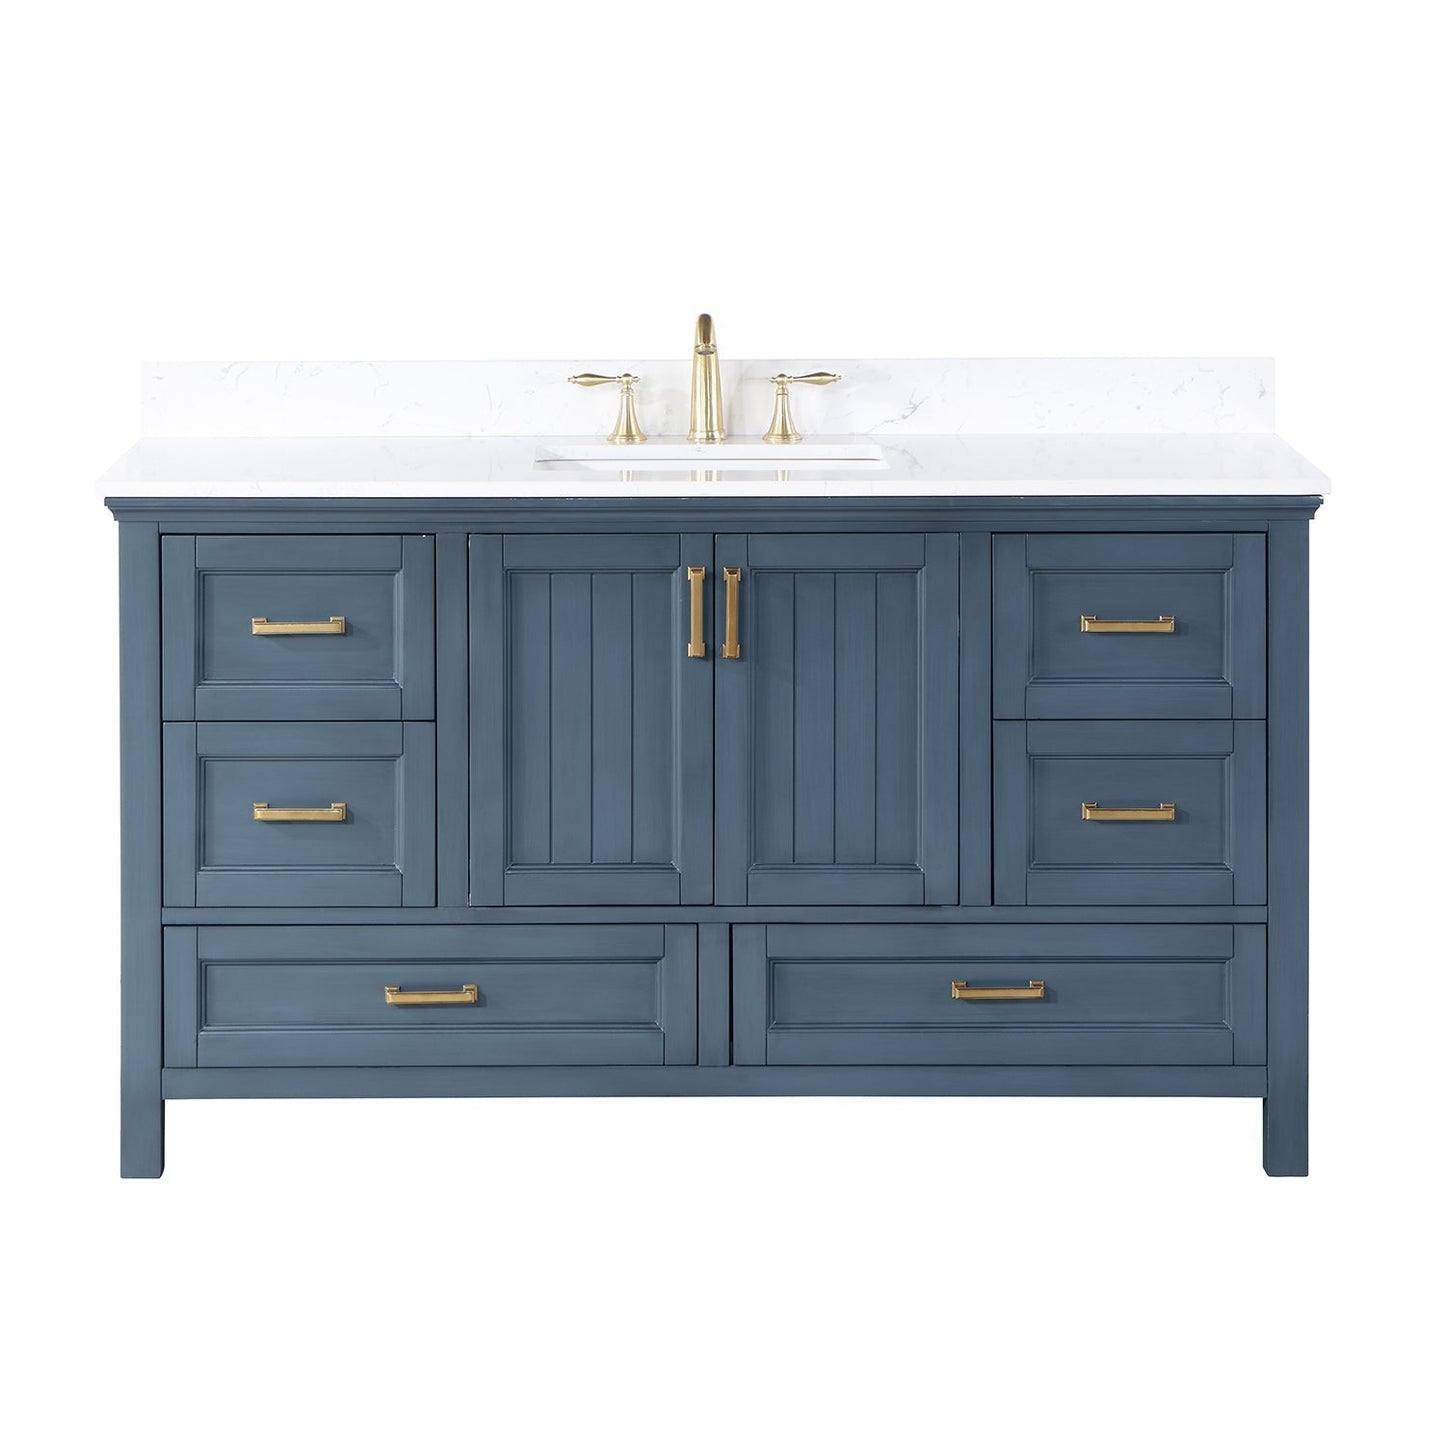 ALTAIR Single Vanity ALTAIR Isla 60" Single Bathroom Vanity Set in Classic Blue, Gray or White and Composite Carrara White Stone Countertop without mirror